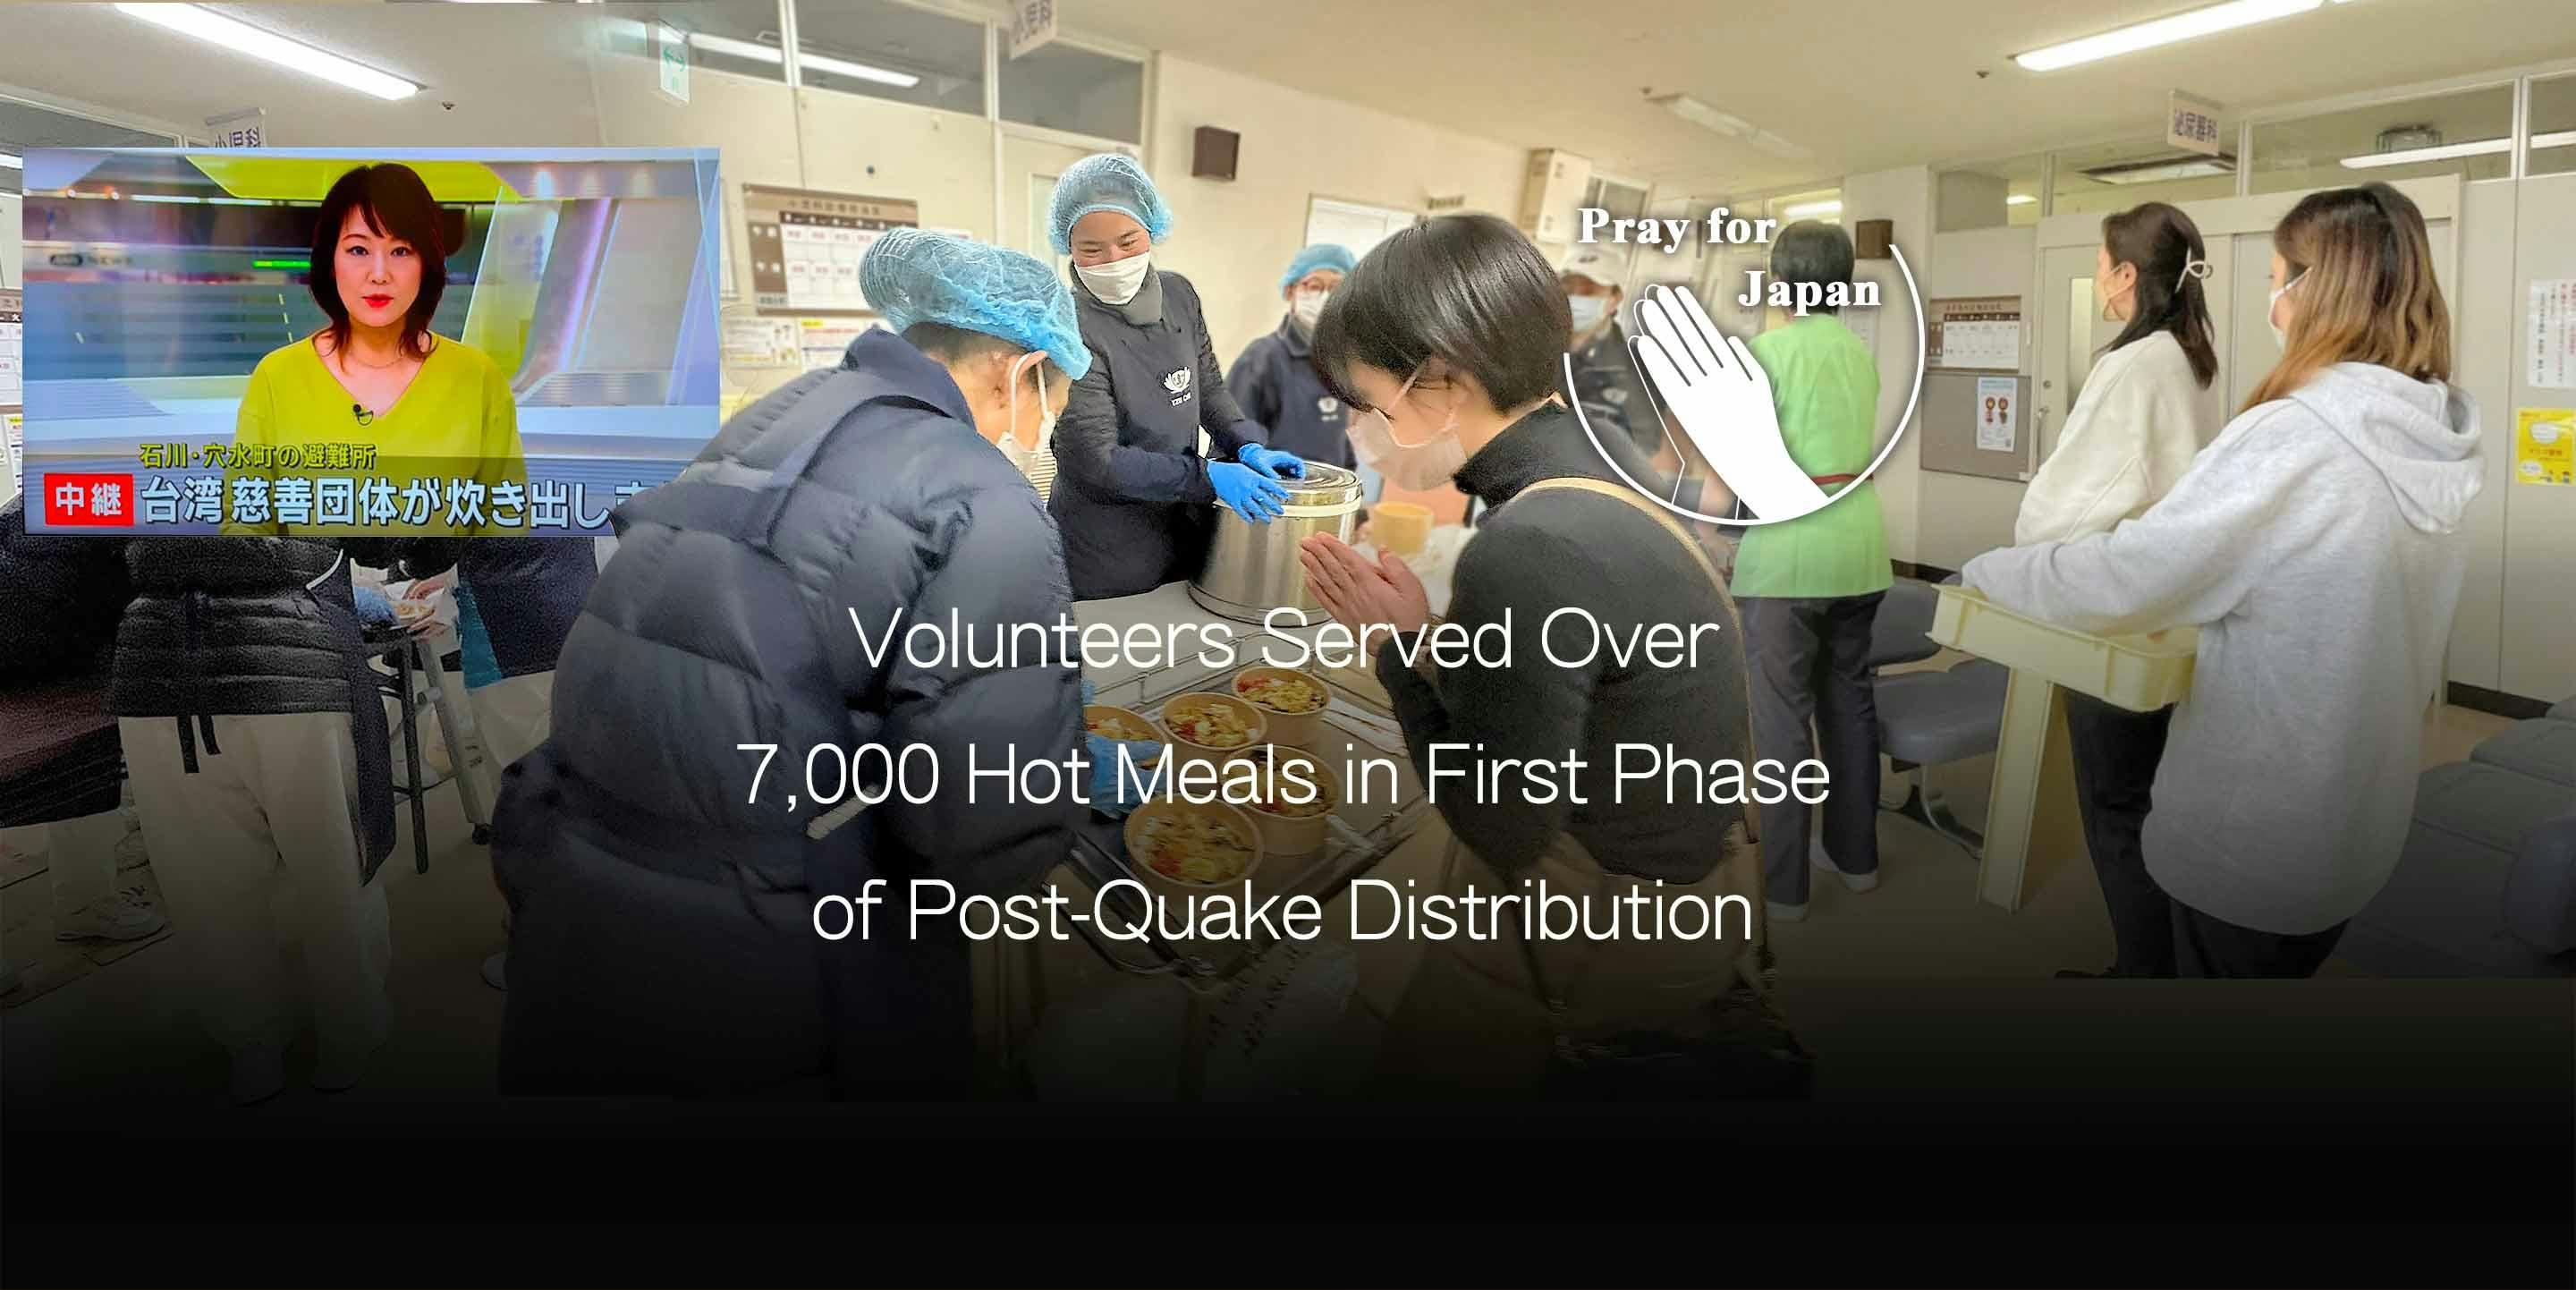 Volunteers Served Over 7,000 Hot Meals in First Phase of Post-Quake Distribution